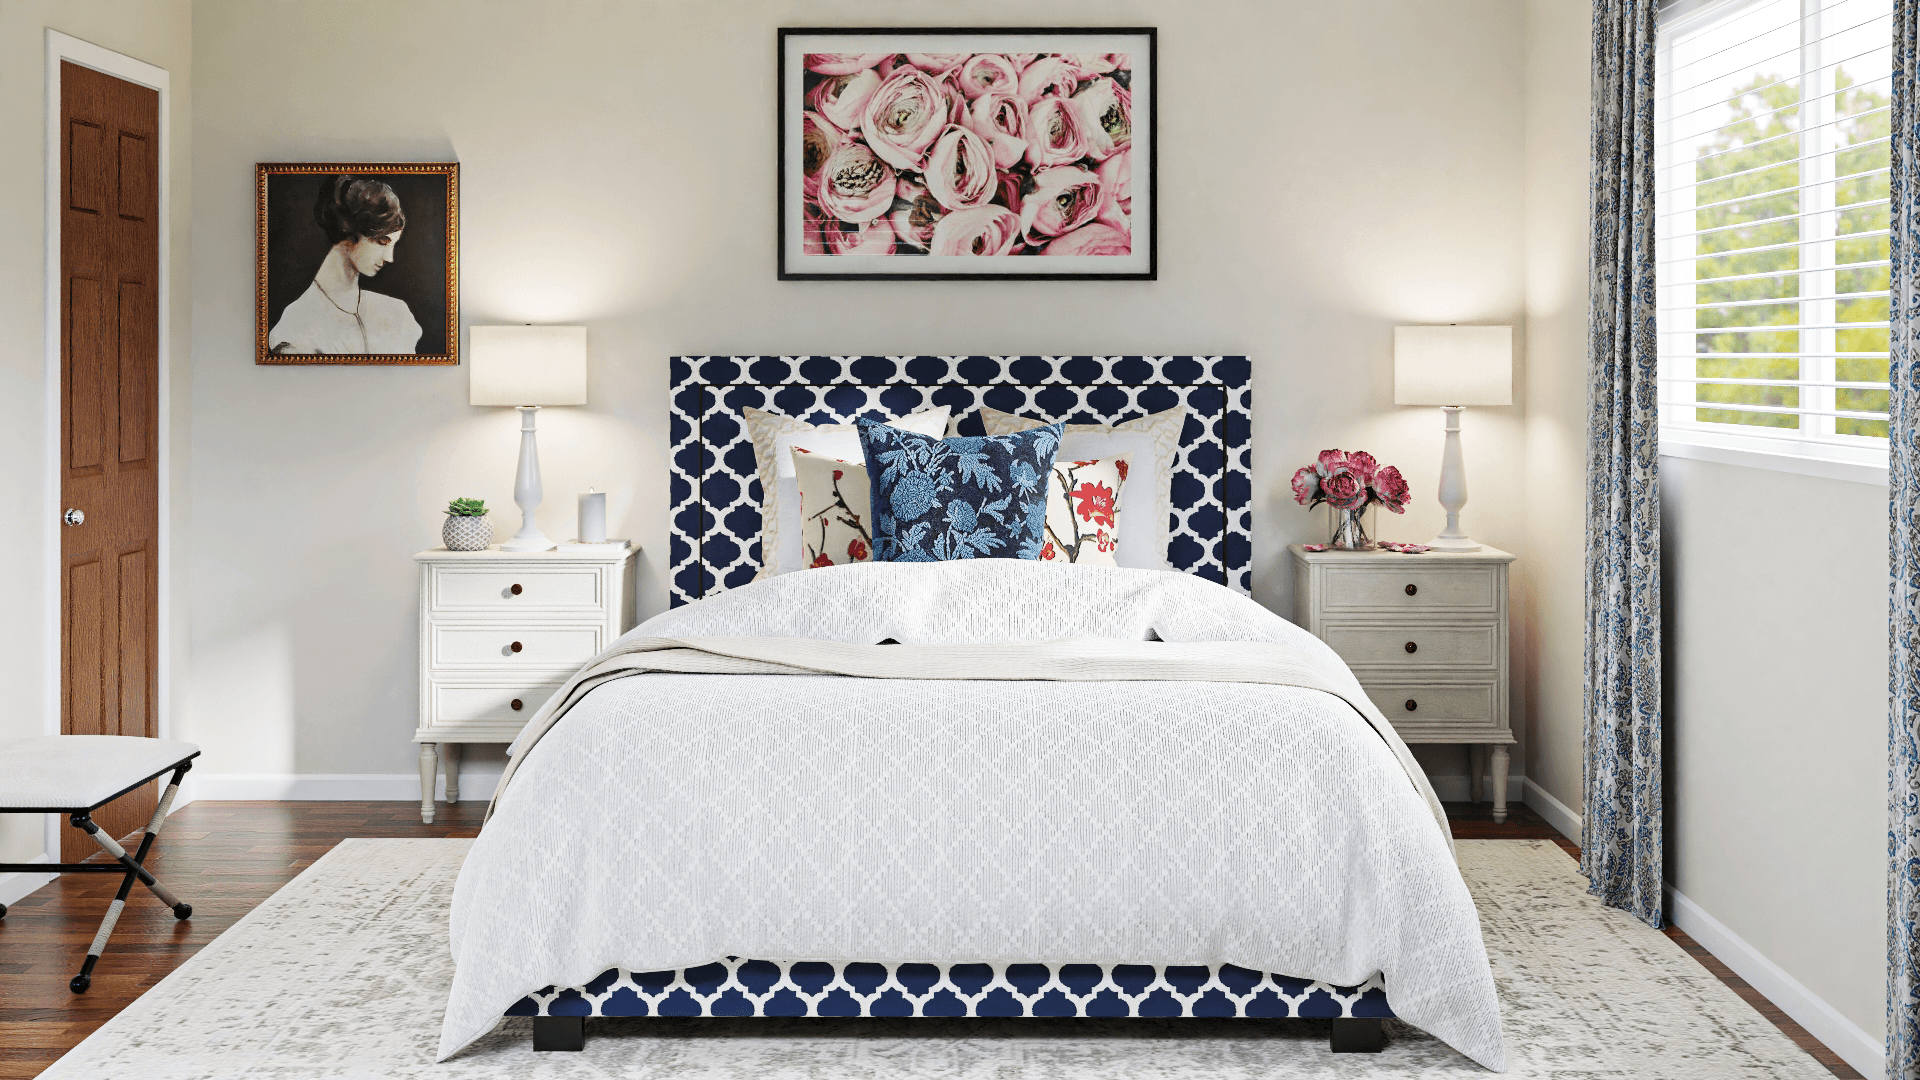 A French Country Bedroom Boasting With Patterns